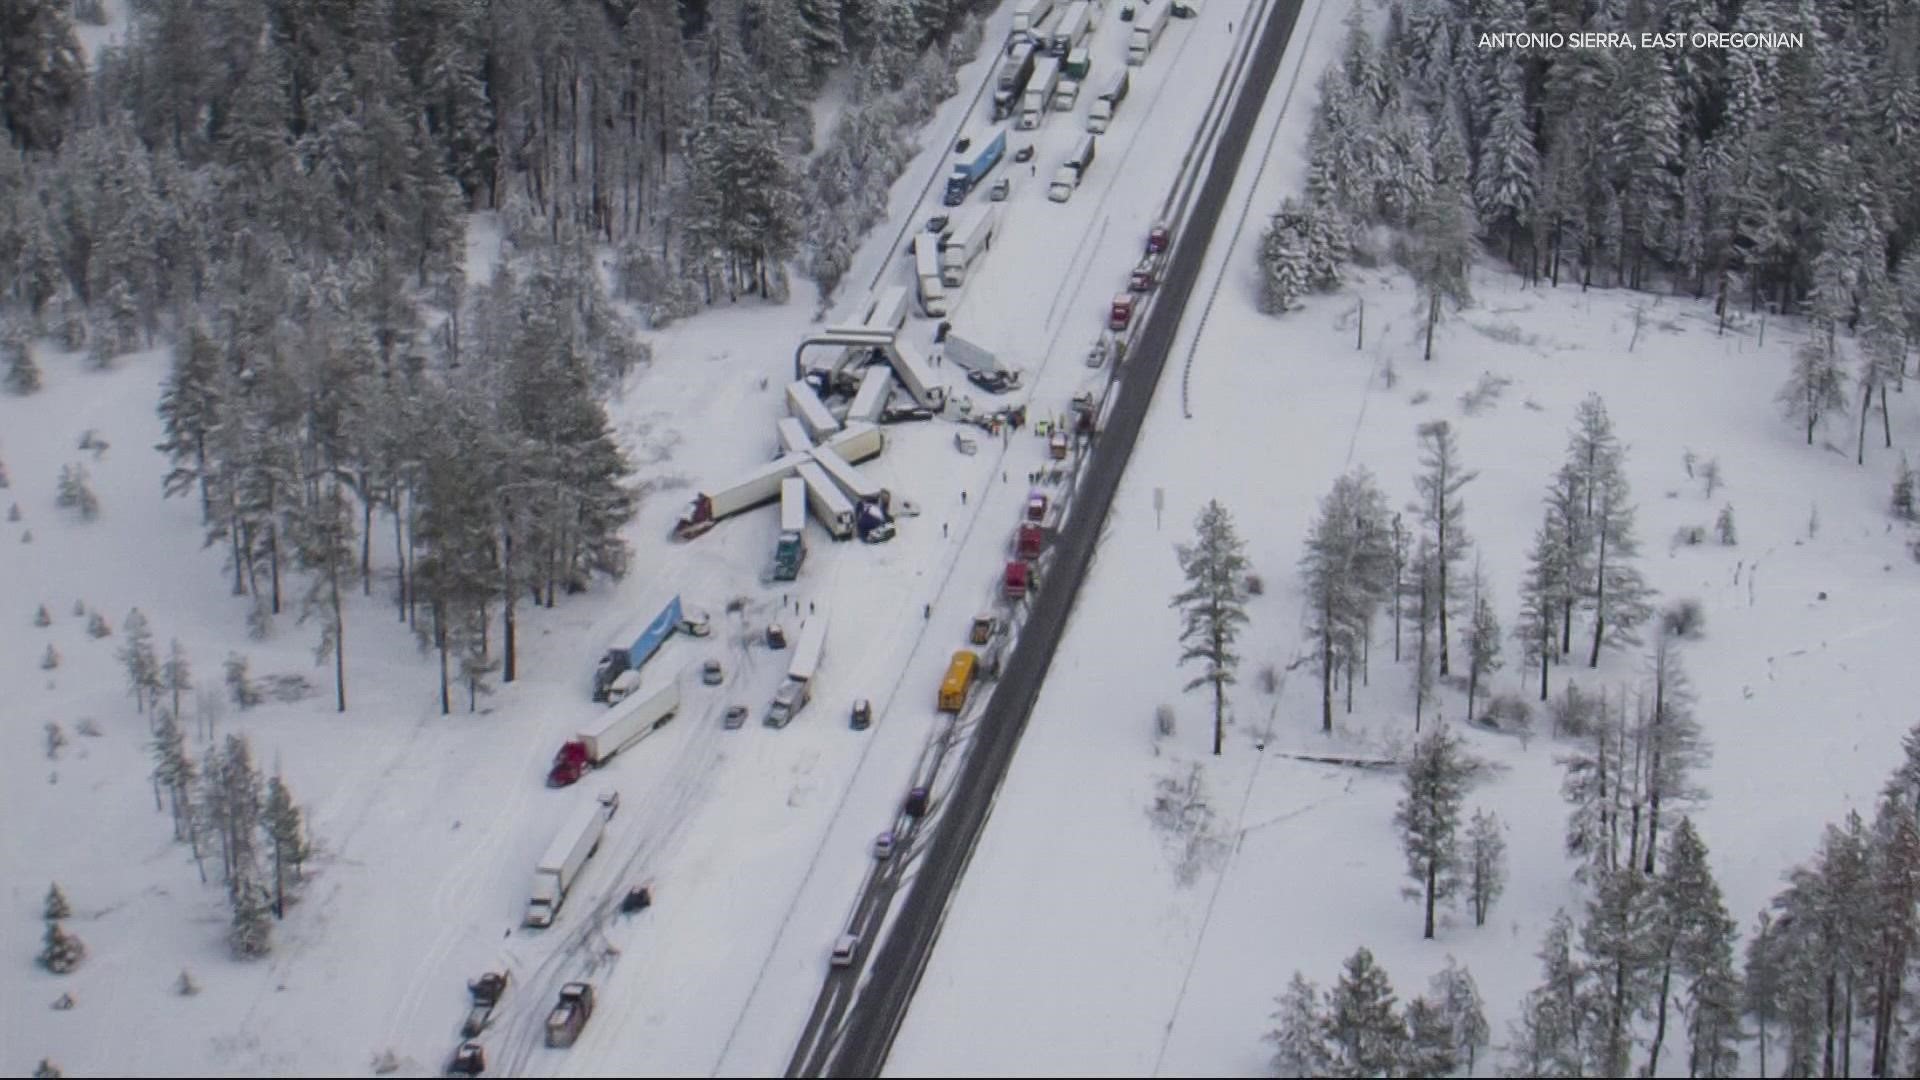 Snowy weather caused a two-mile-long pileup of crashed cars on I-84 in Eastern Oregon over the weekend. Crews worked for hours to reopen the interstate.